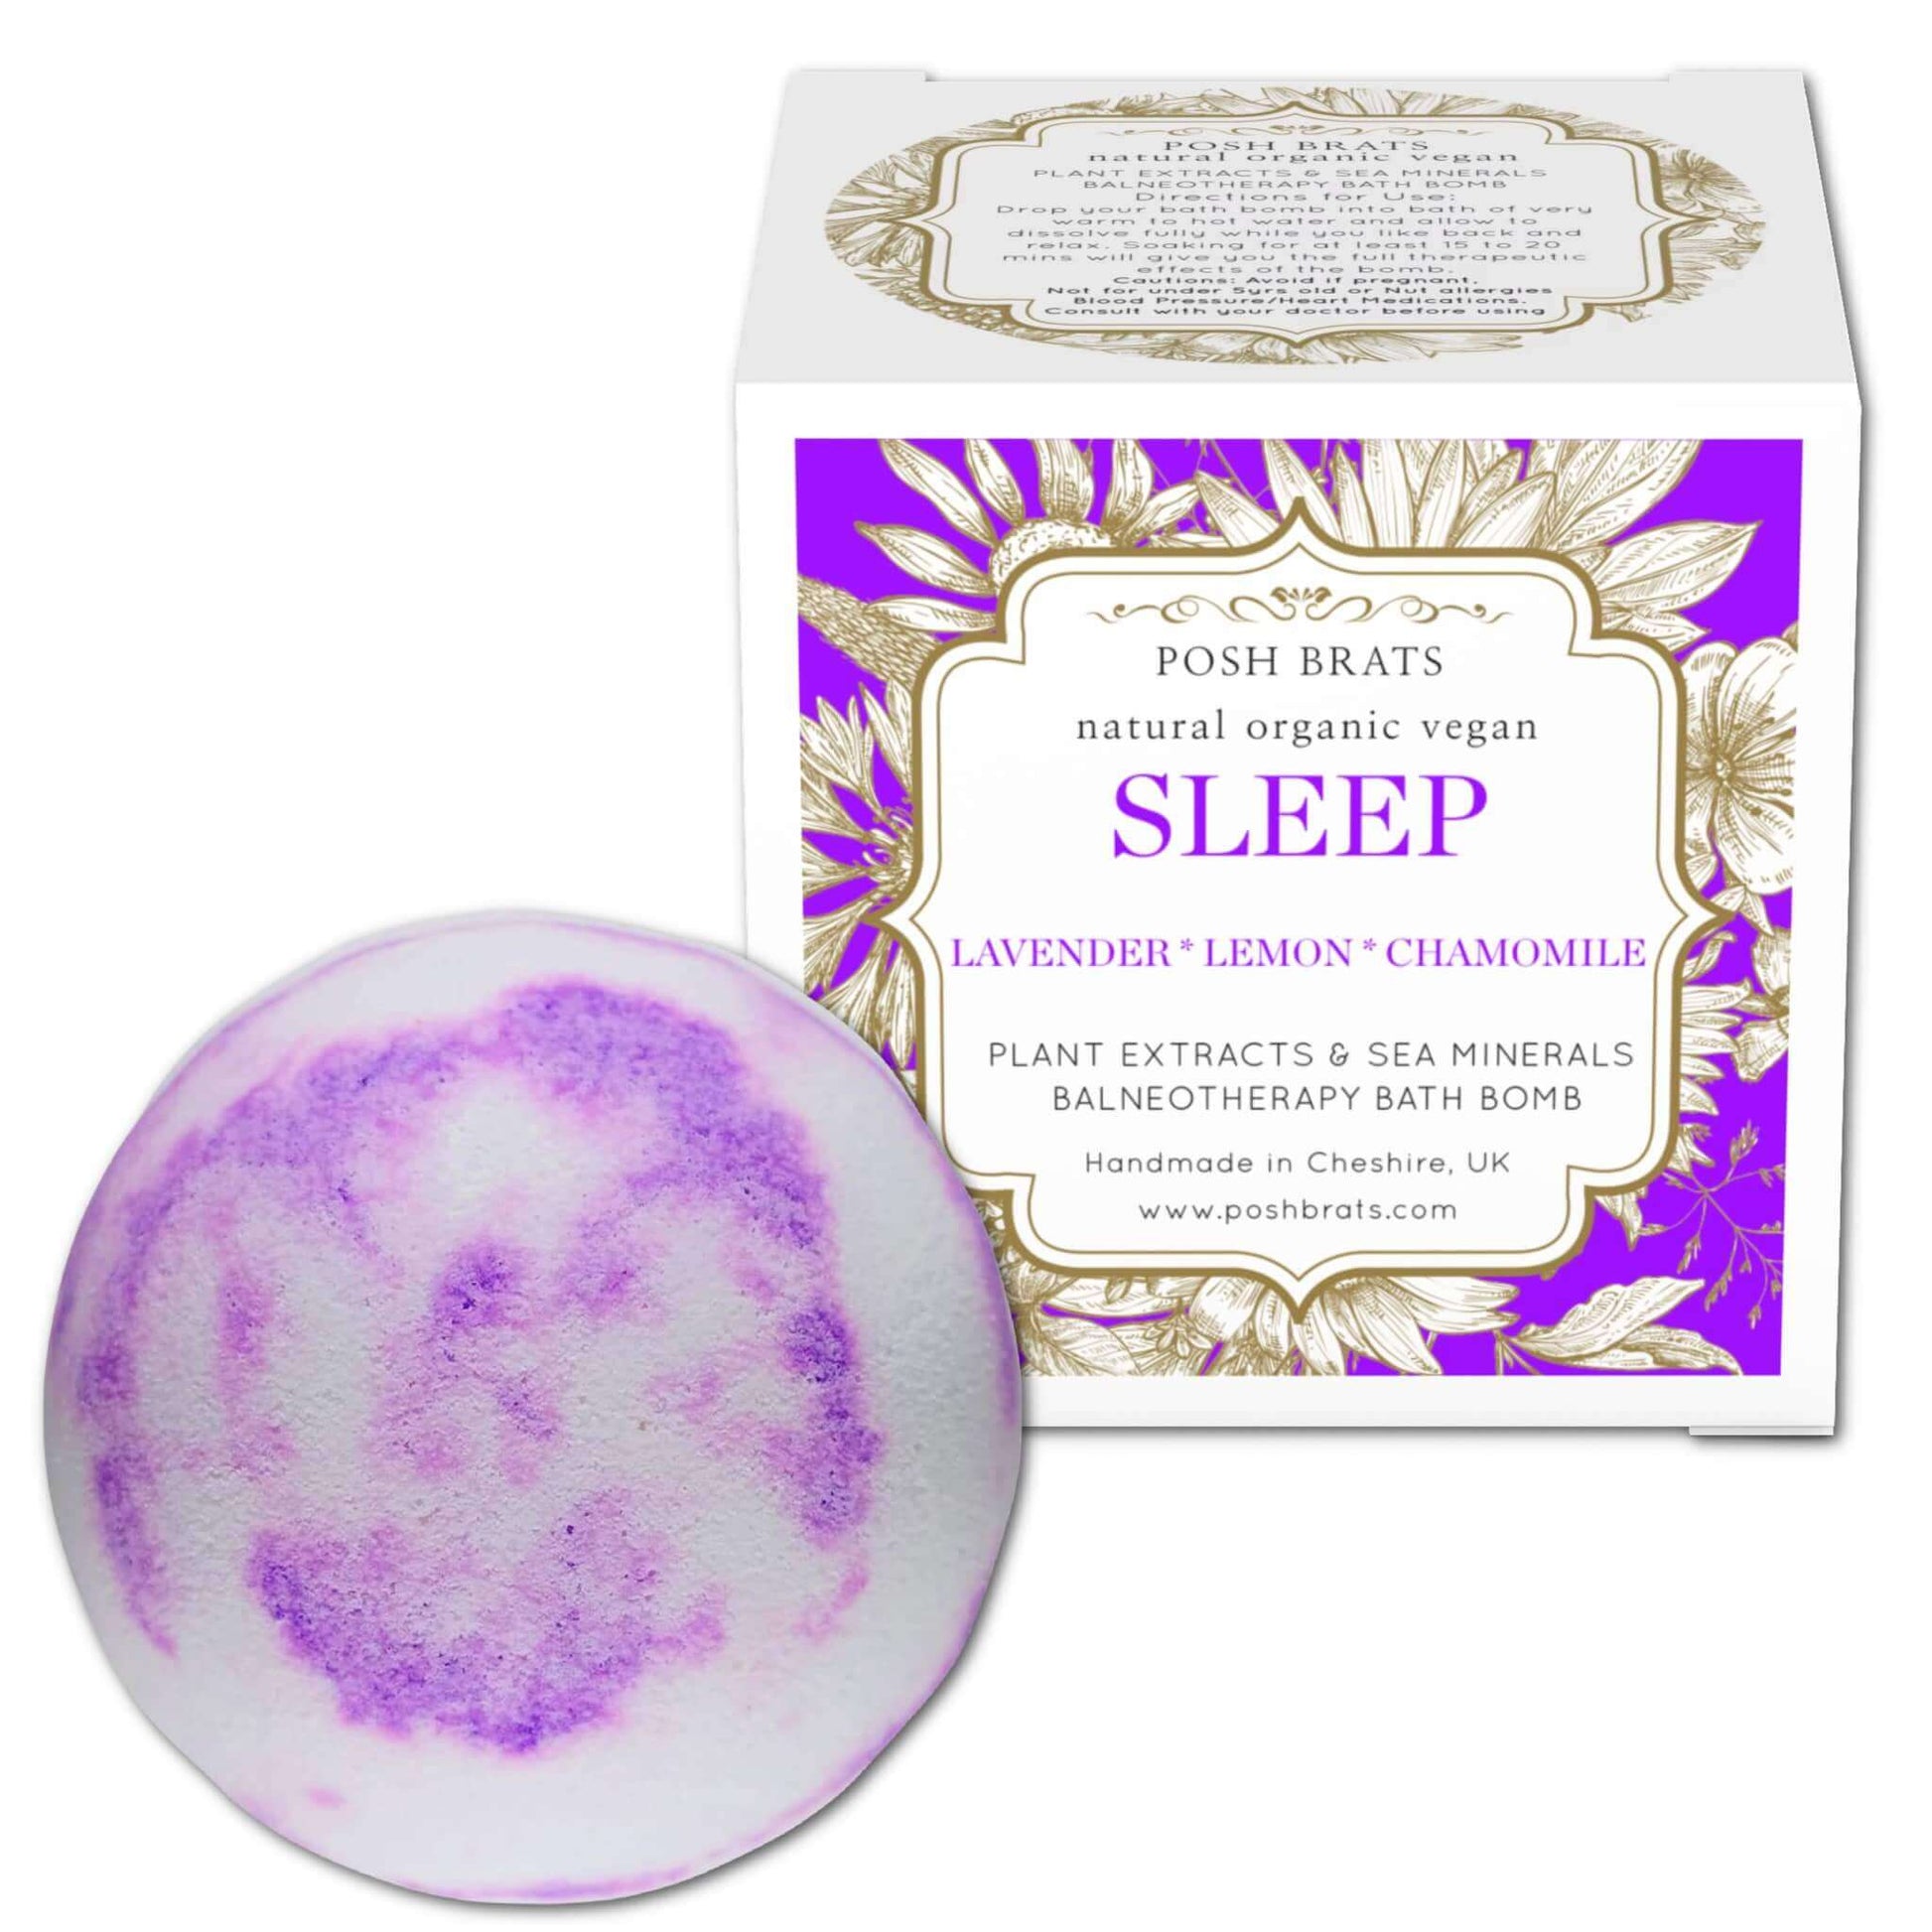 Unwind with our Sleep Aromatherapy Bath Bomb, perfectly infused with calming sea minerals. Indulge in relaxation tonight!